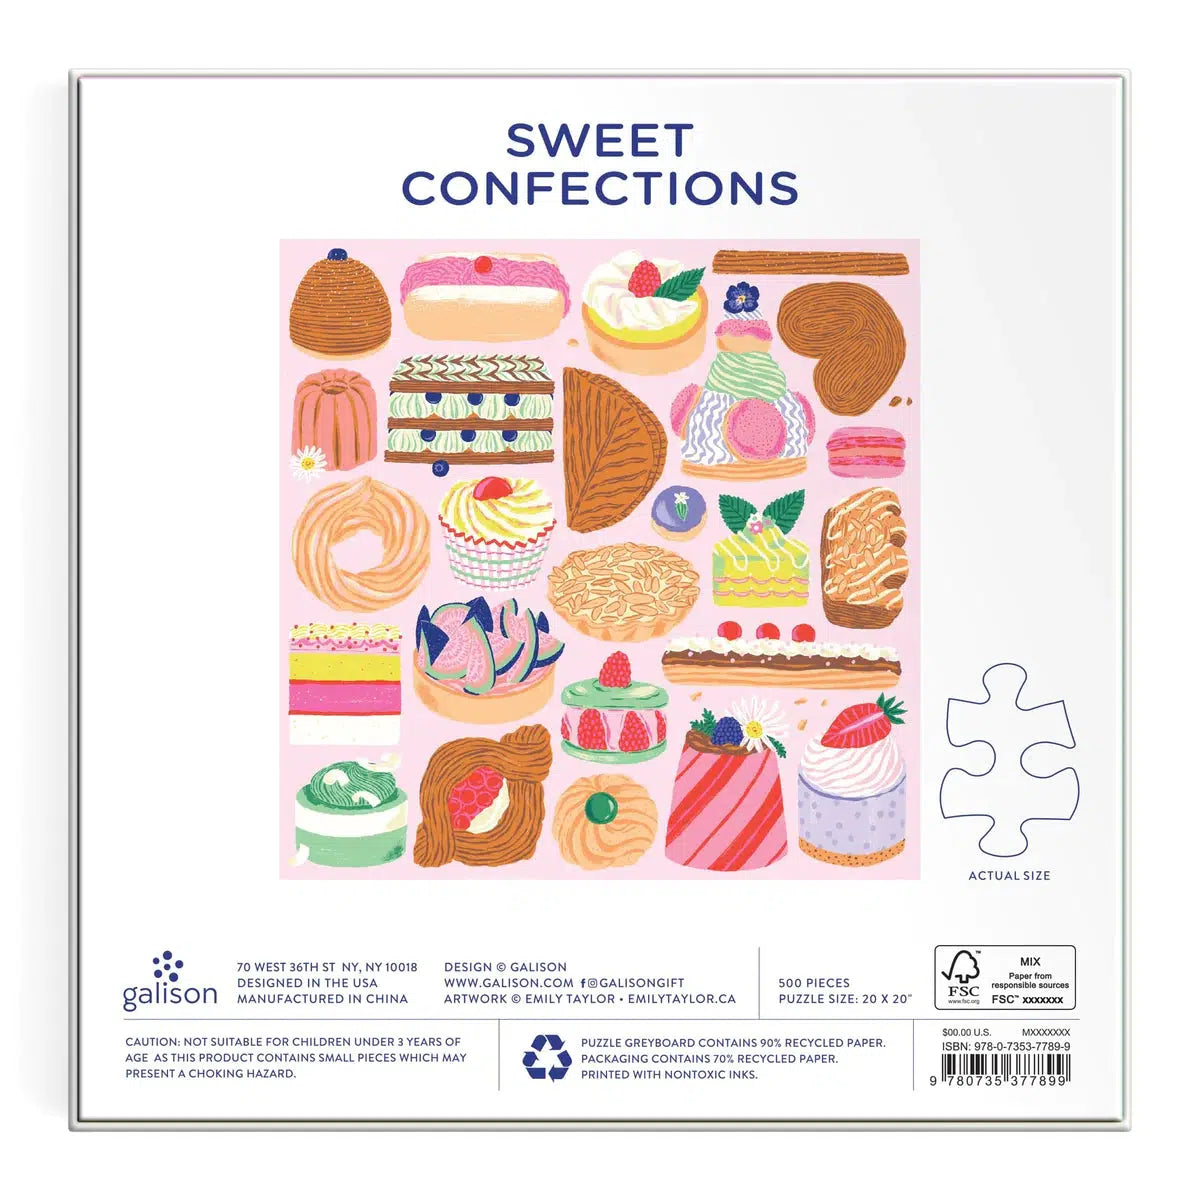 Sweet Confections 500 Piece Jigsaw Puzzle Galison